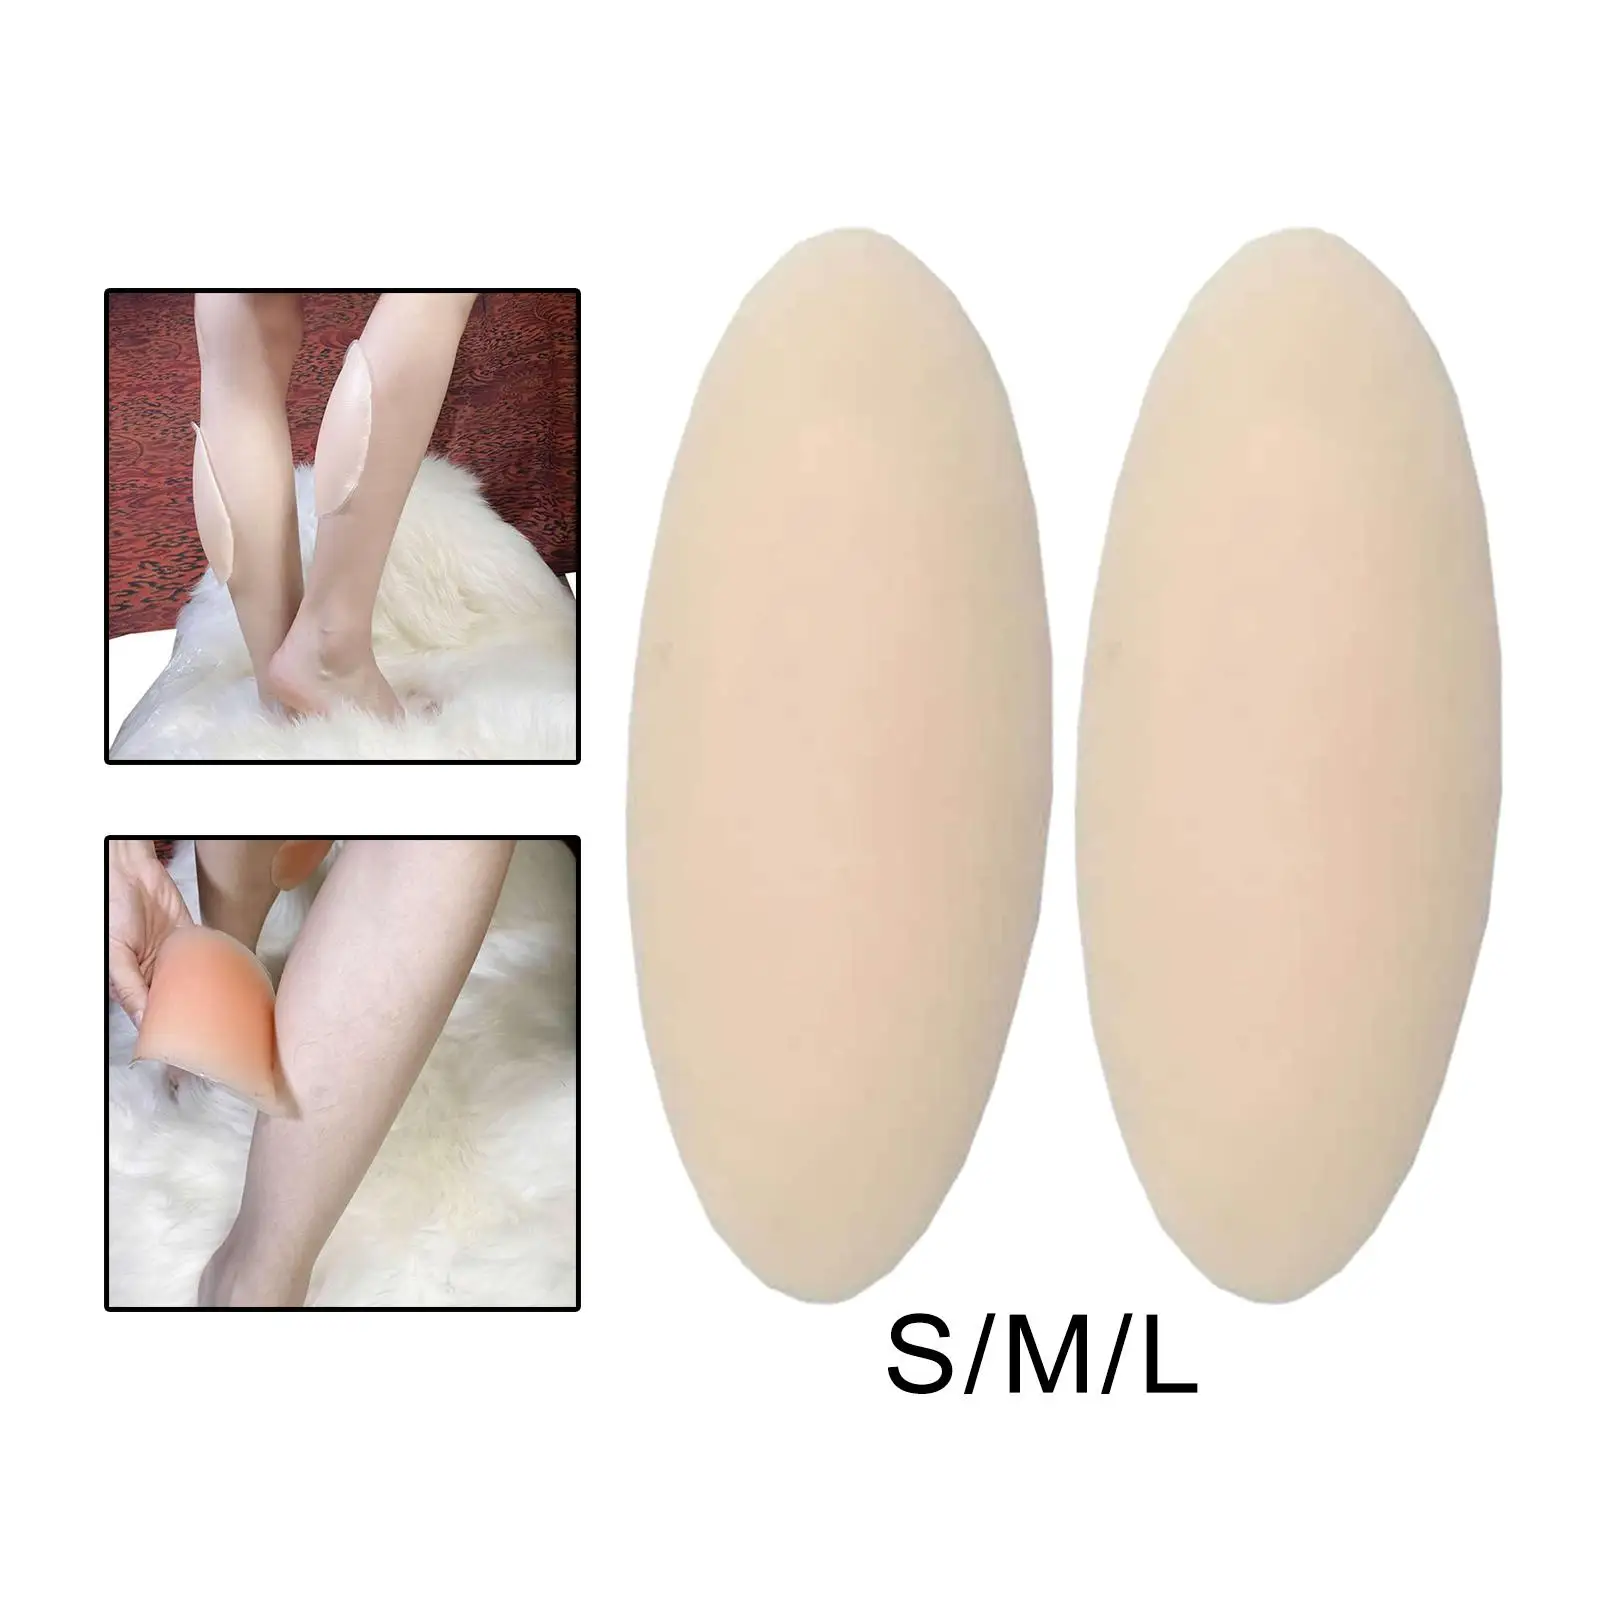 Anti Allergic Calf Pads Gel Leg Correction Pad Skin Friendly Comfortable Soft Leg Onlays for Crooked or Thin Skinny Legs Lady